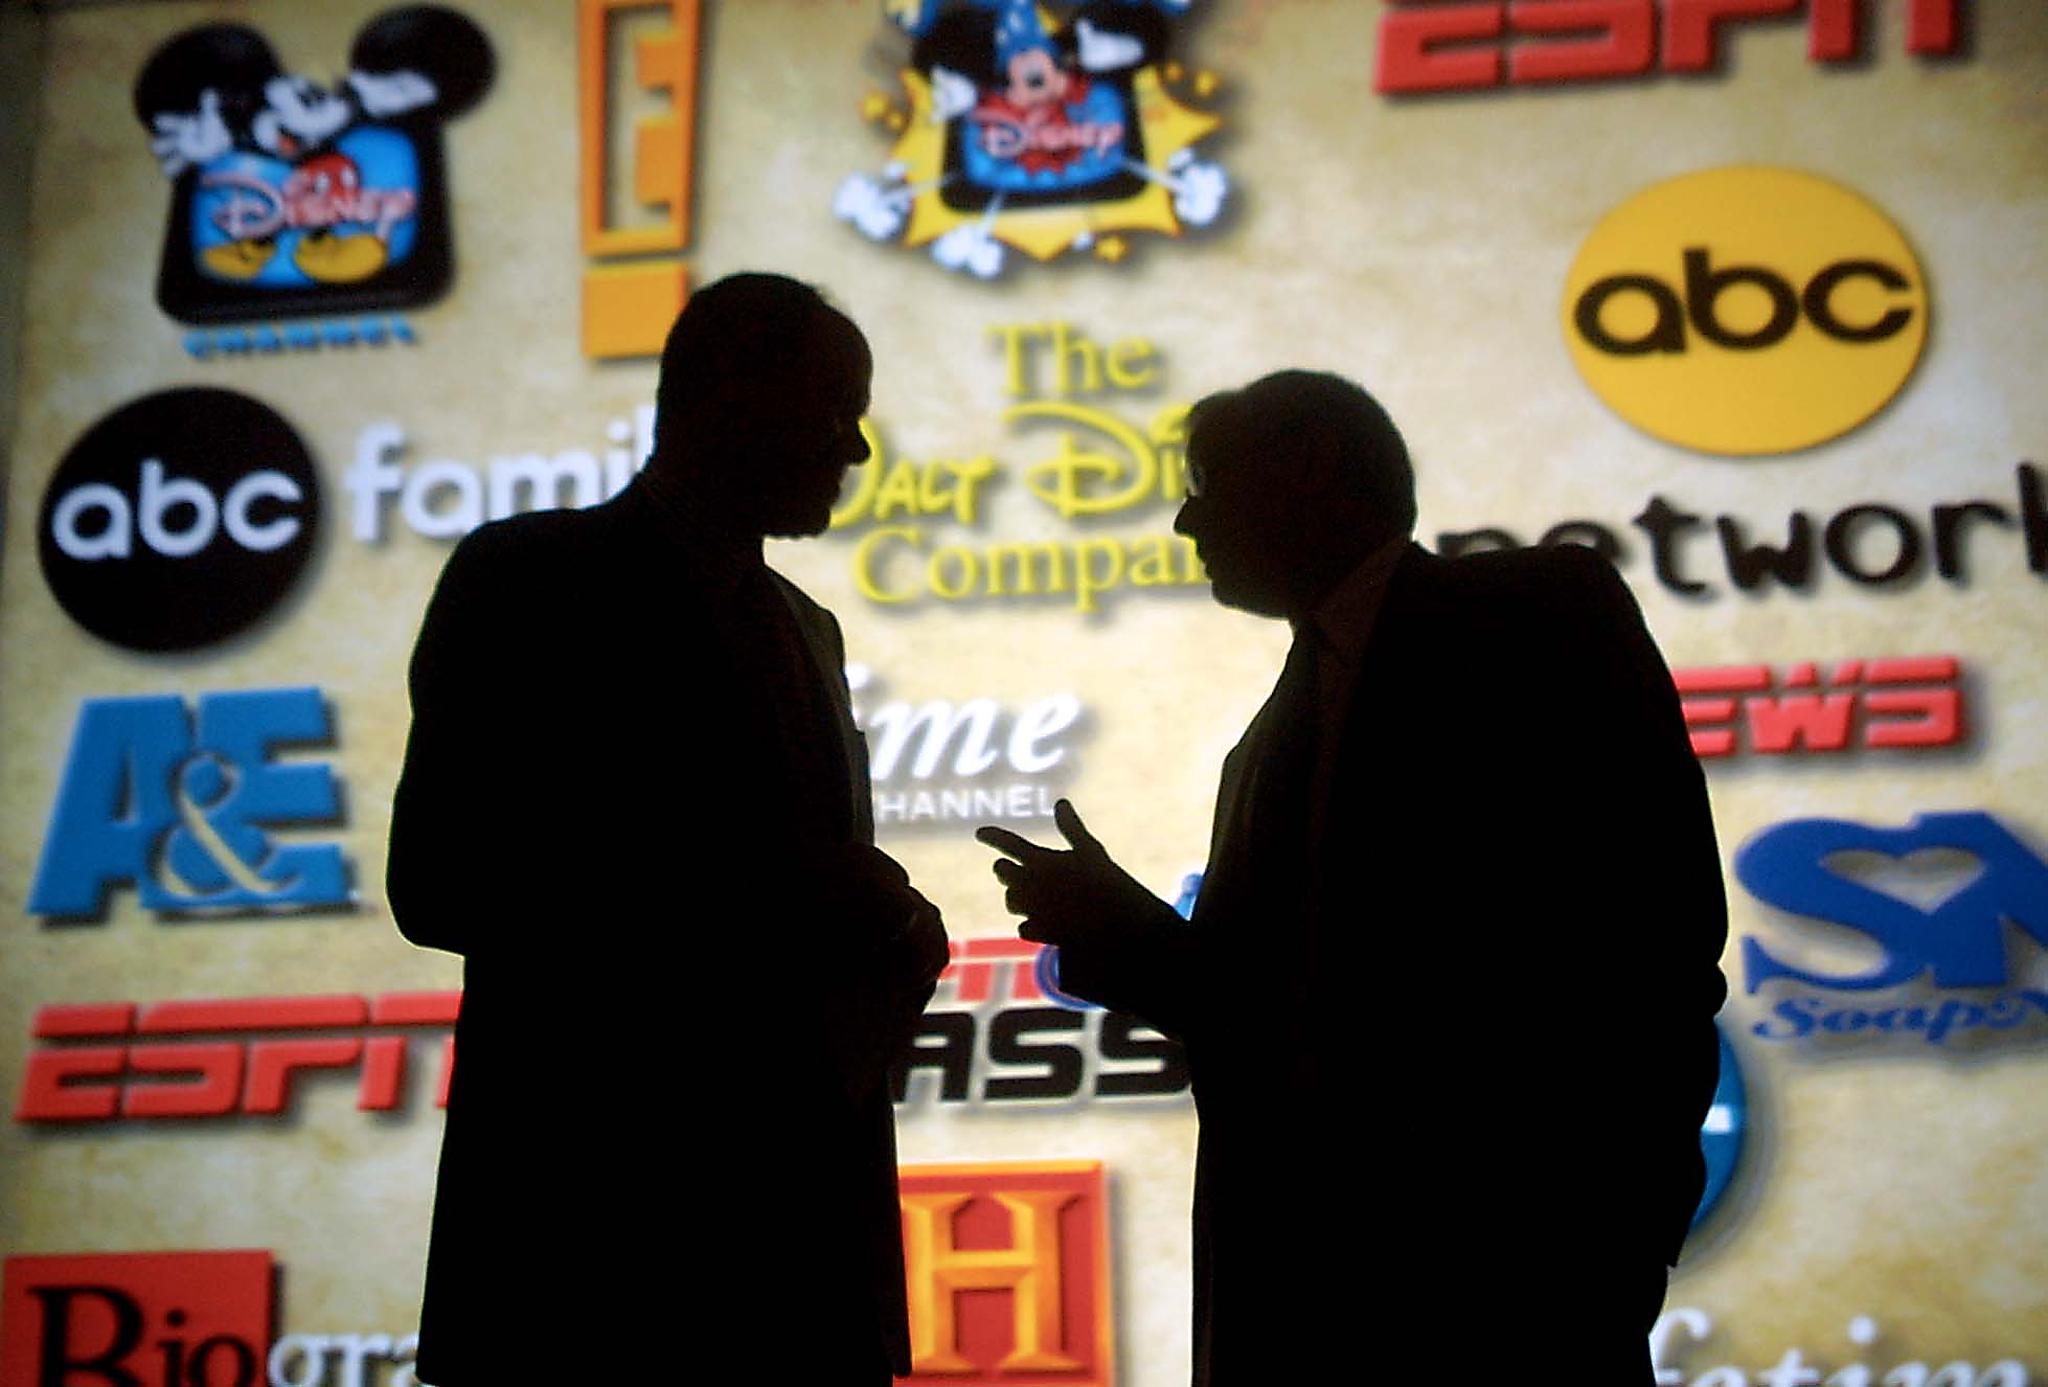 PASADENA, CA - JULY 23: Michael Eisner (L), chairman and CEO of the Walt Disney Company, talks with Mel Woods (R), president and CEO of the Haim Saban, in front of a projection, showing logos of the new acquisitions, during announcement of 100 percent purchase of Fox Family Worldwide and Haim Saban July 23, 2001 in Pasadena, CA. Fox Family and its subsidiaries will be renamed ABC Family. (Photo credit should read FREDERICK M. BROWN/AFP via Getty Images)